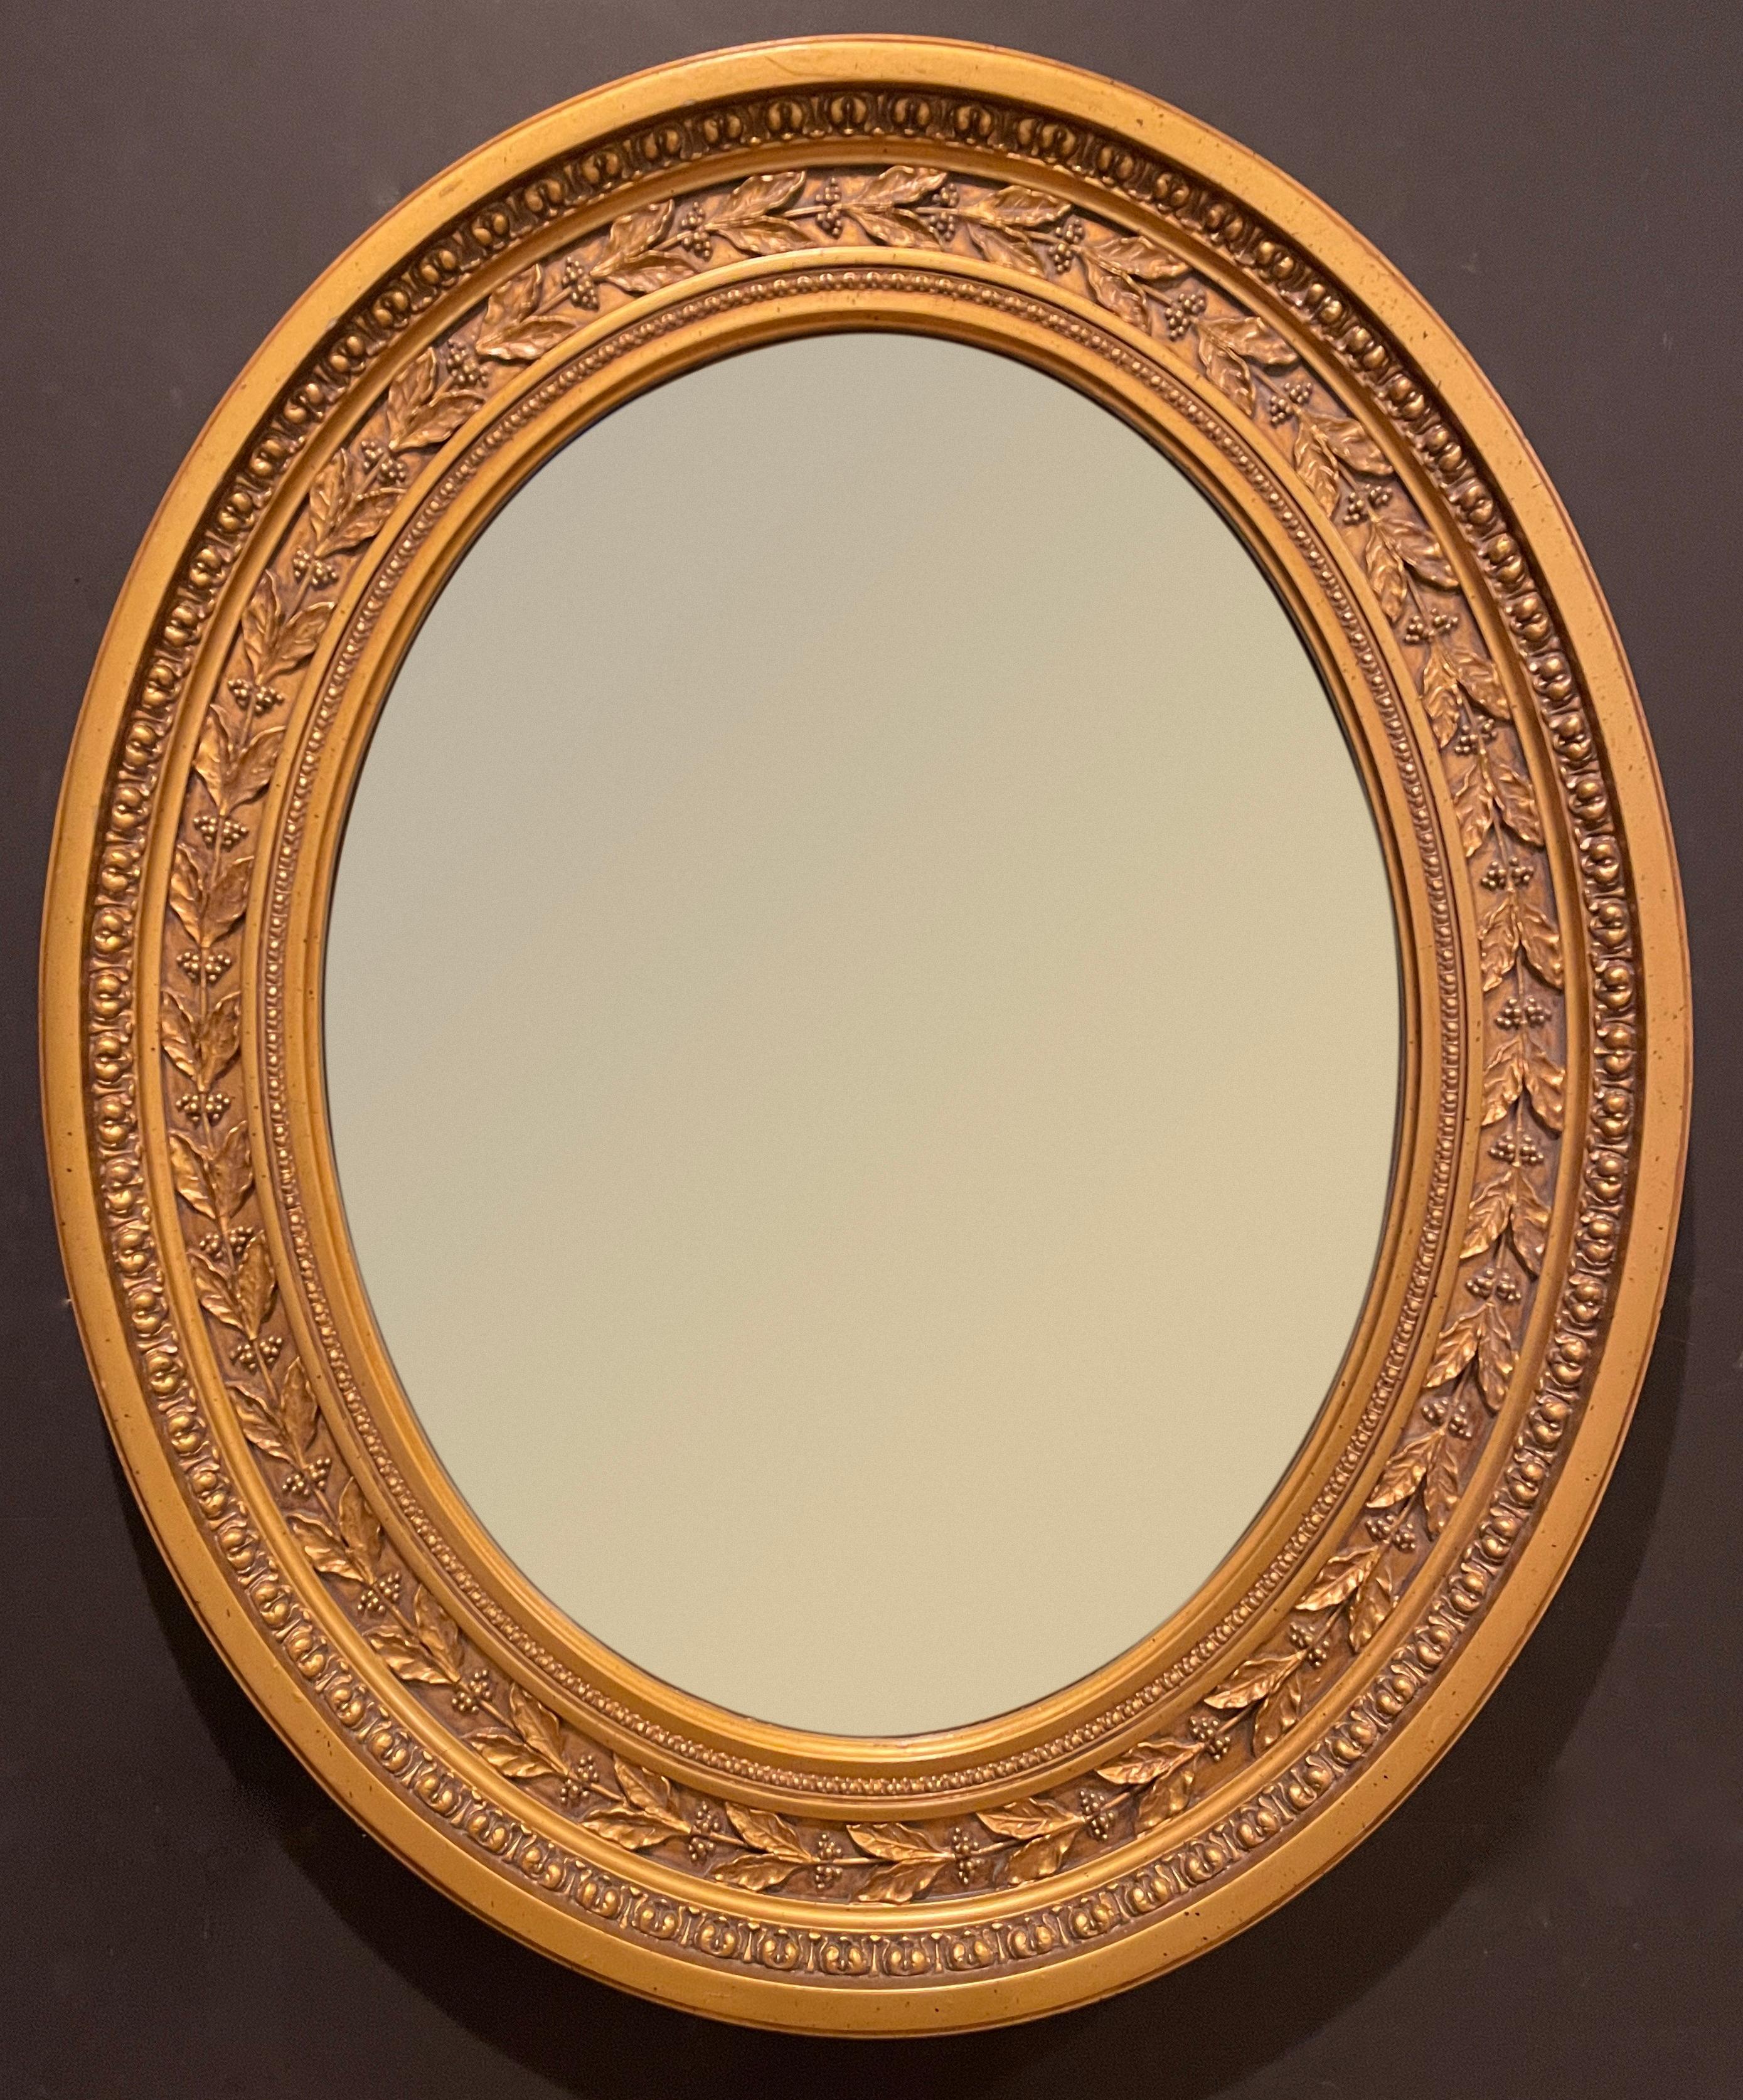 Gilt oval frame in the Regency style with nice modeling of laurel leaves and berries with additional moulding element of a type of egg and dart motif.